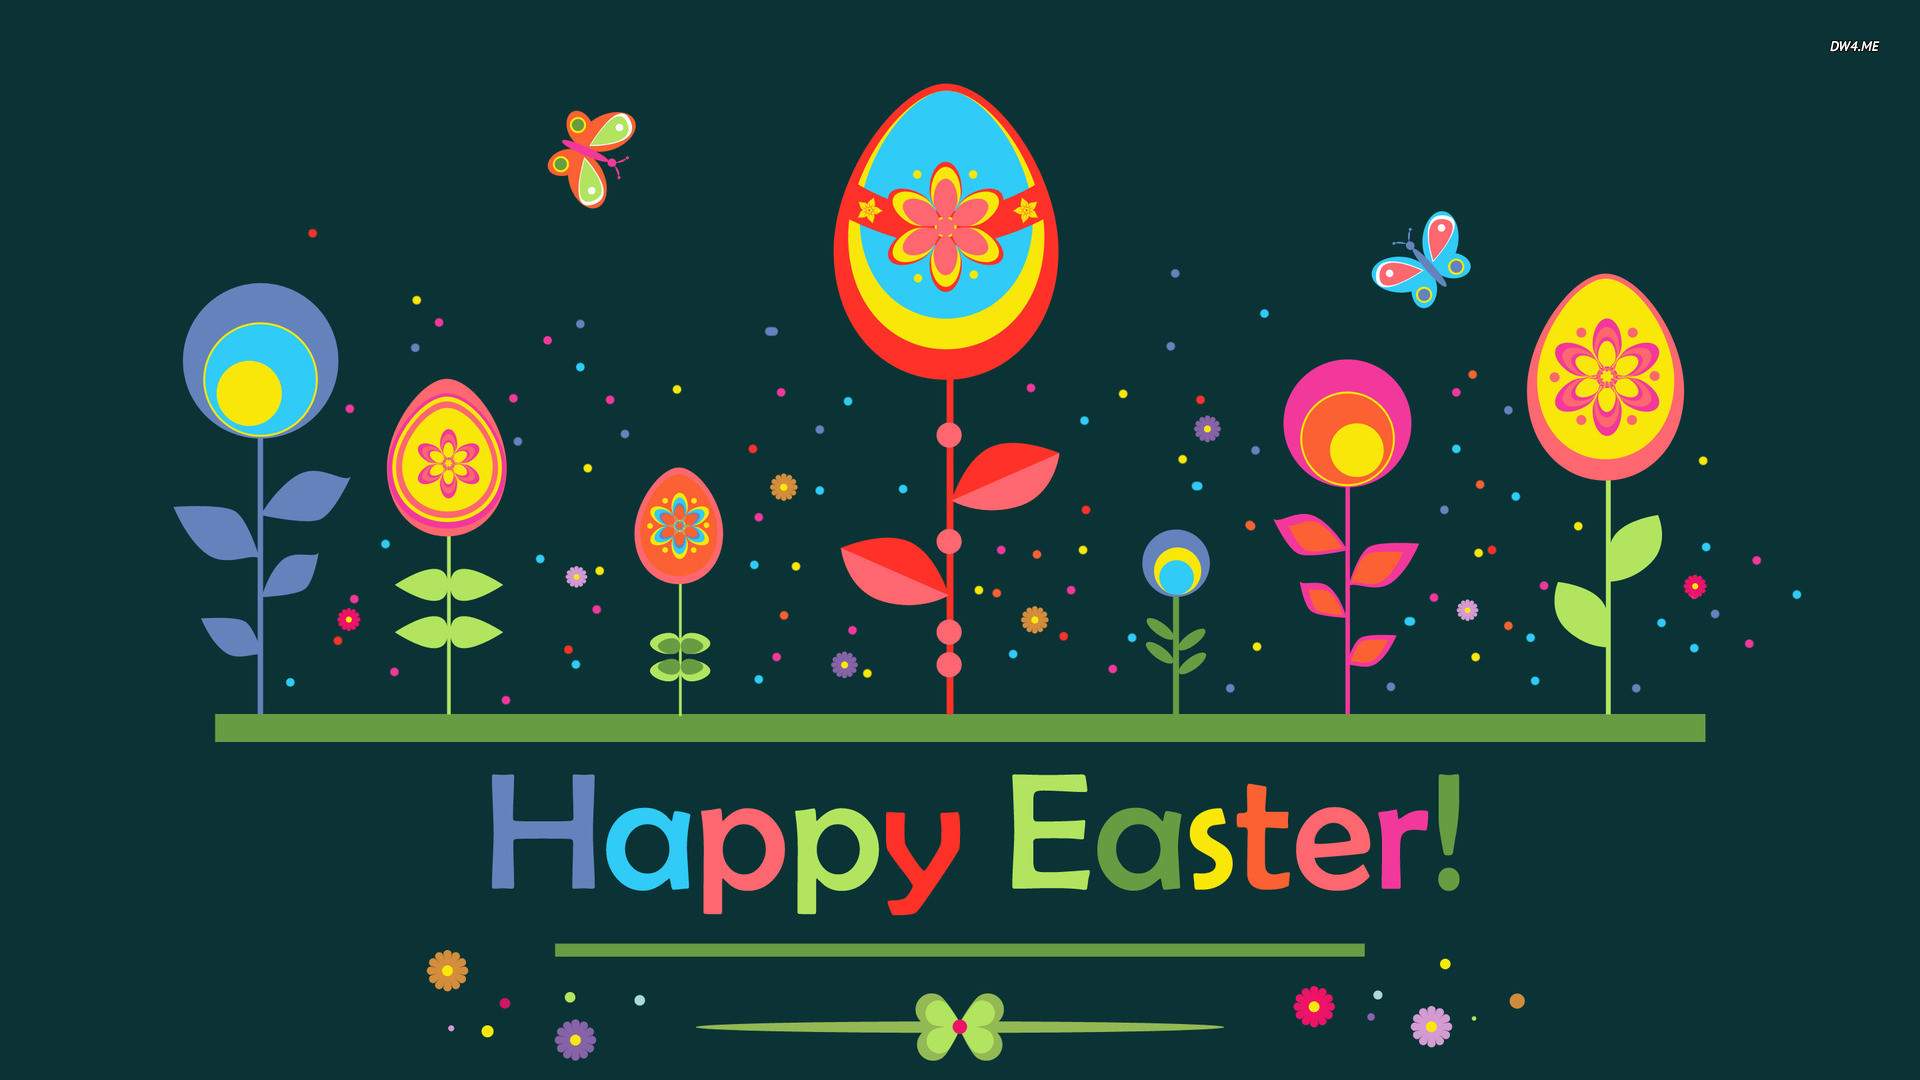 1920x1080 religion happy easter desktop background images wallpapers Wallpaper HD